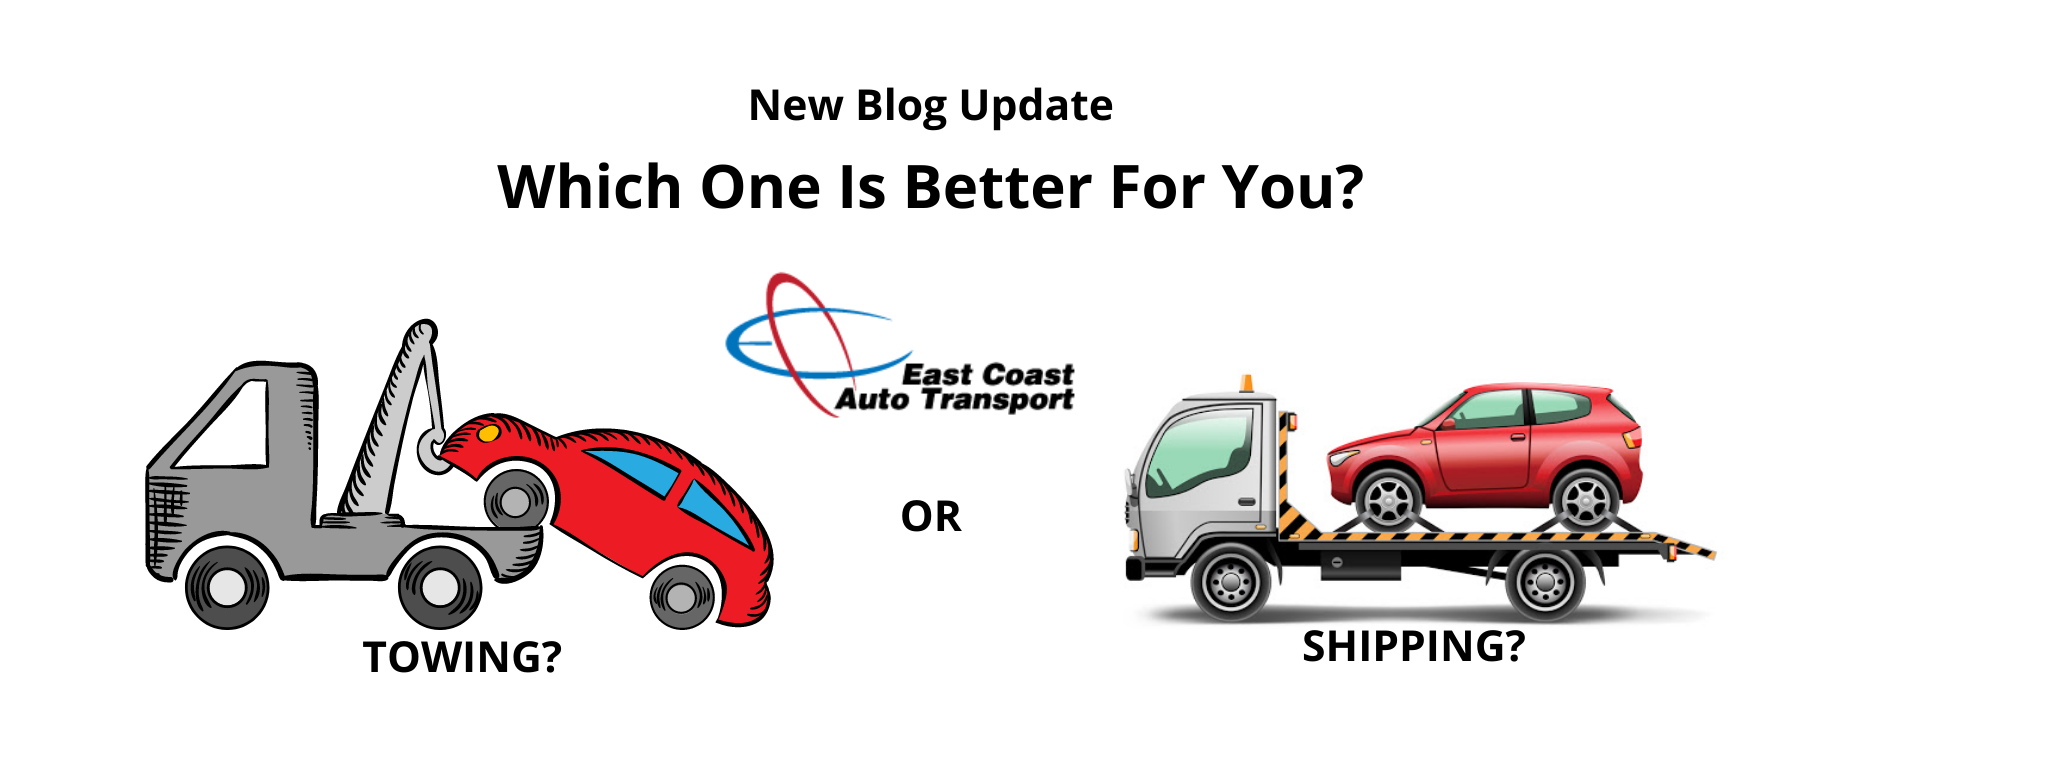 EC Auto - Towing vs Shipping Banner